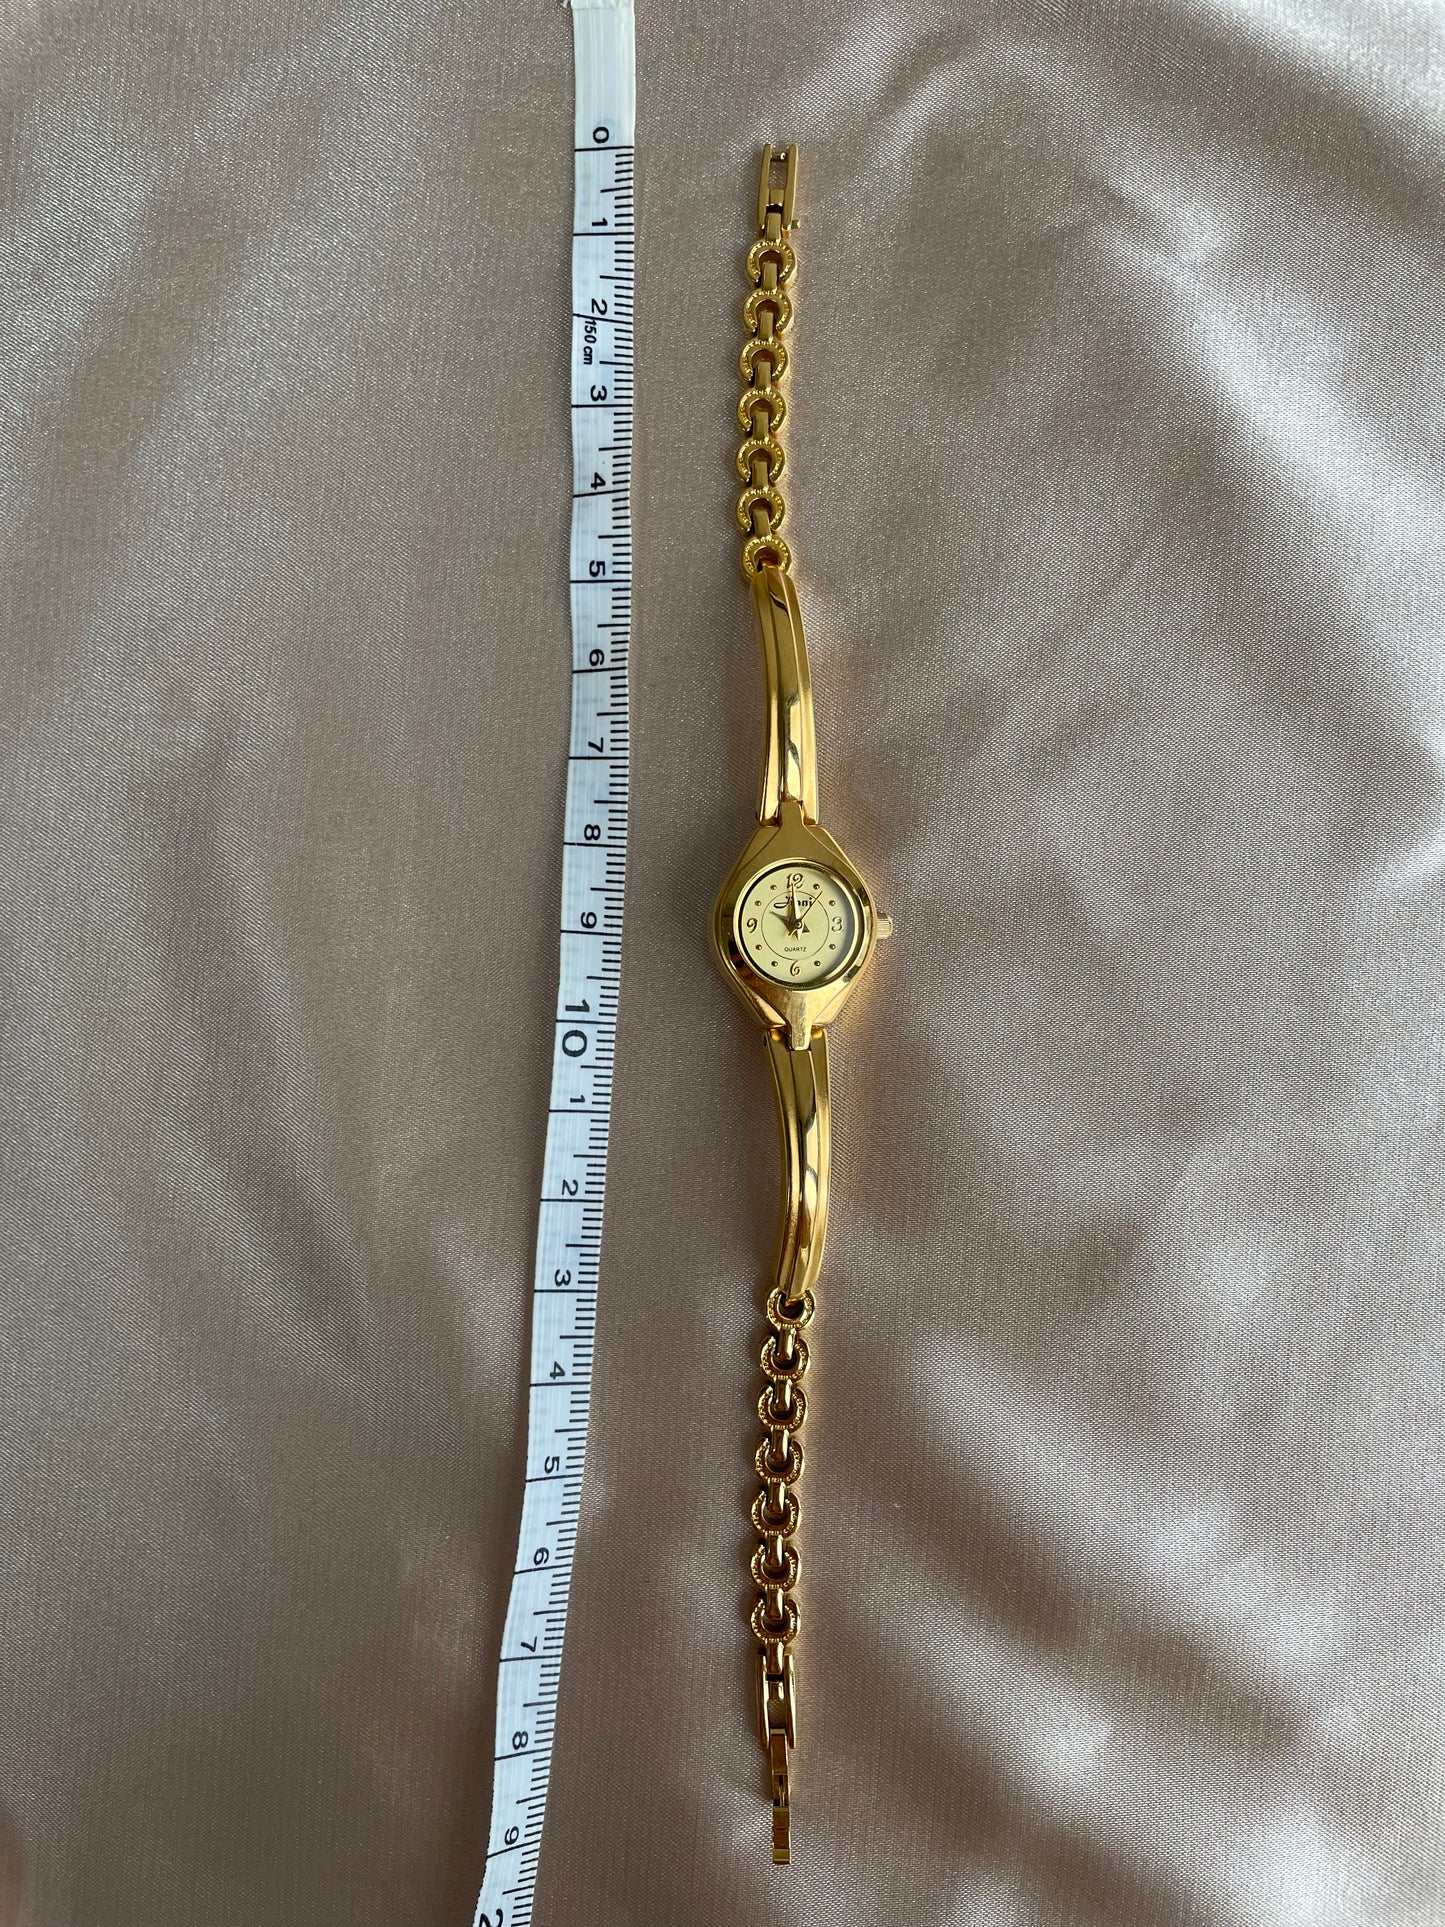 Classic vintage gold watch